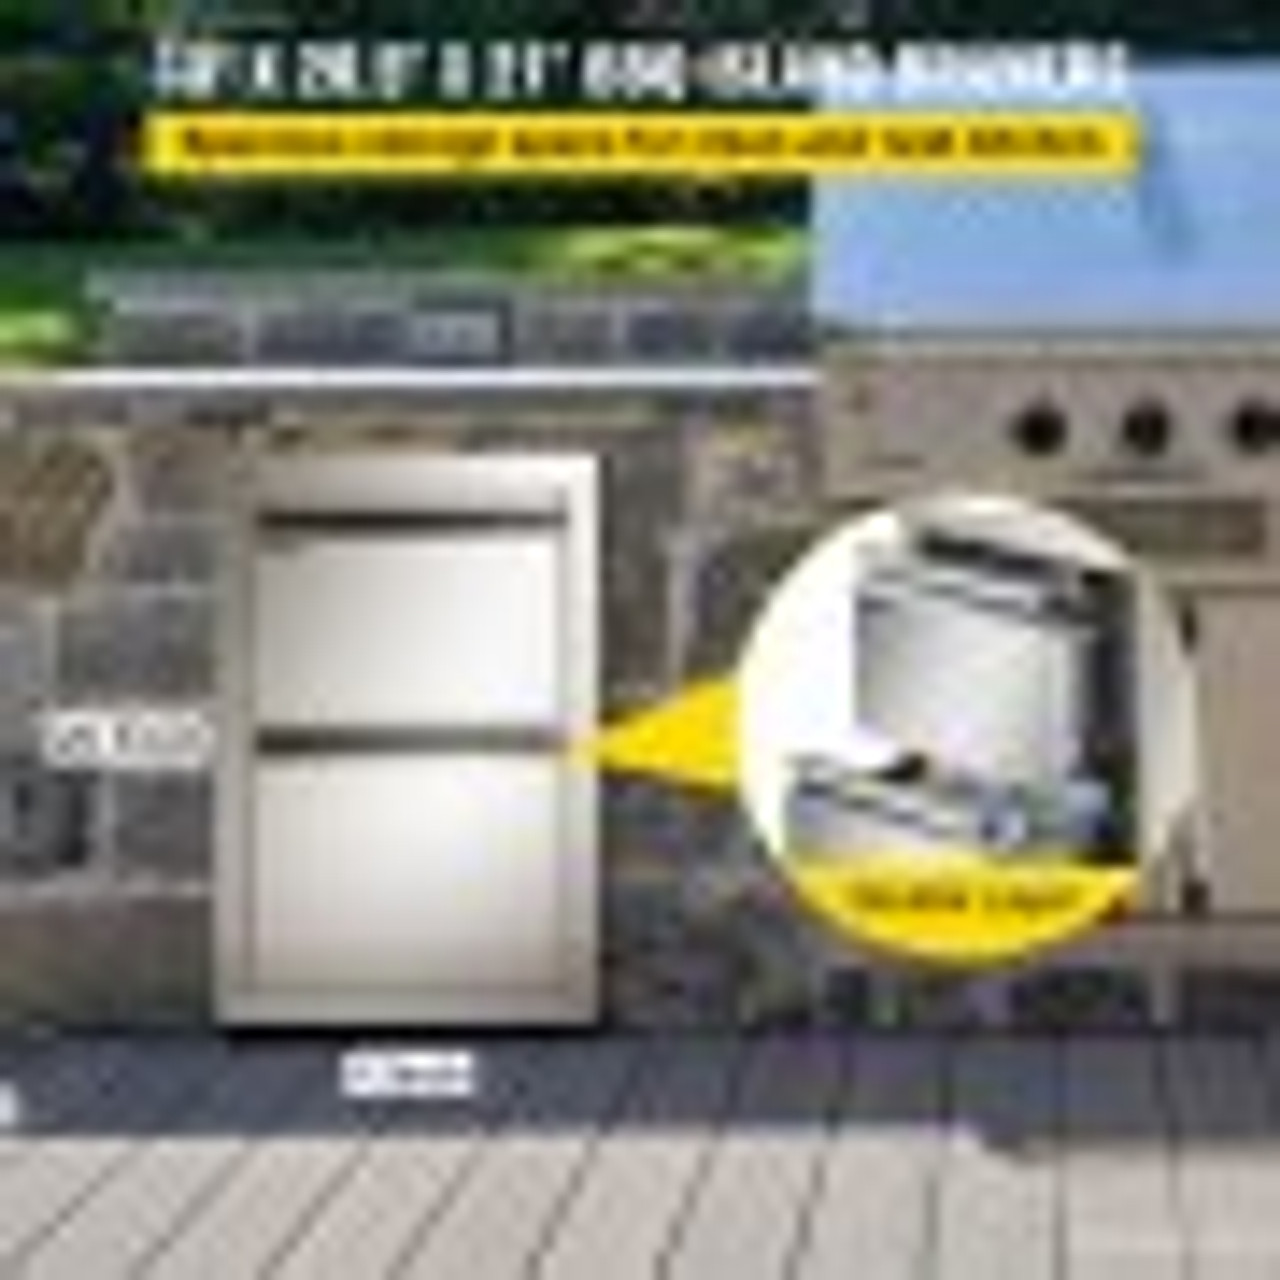 Outdoor Kitchen Drawers 13" W x 20.5" H x 21" D, Flush Mount Double BBQ Access Drawers Stainless Steel with Recessed Handle, BBQ Island Drawers for Outdoor Kitchens or Grill Station